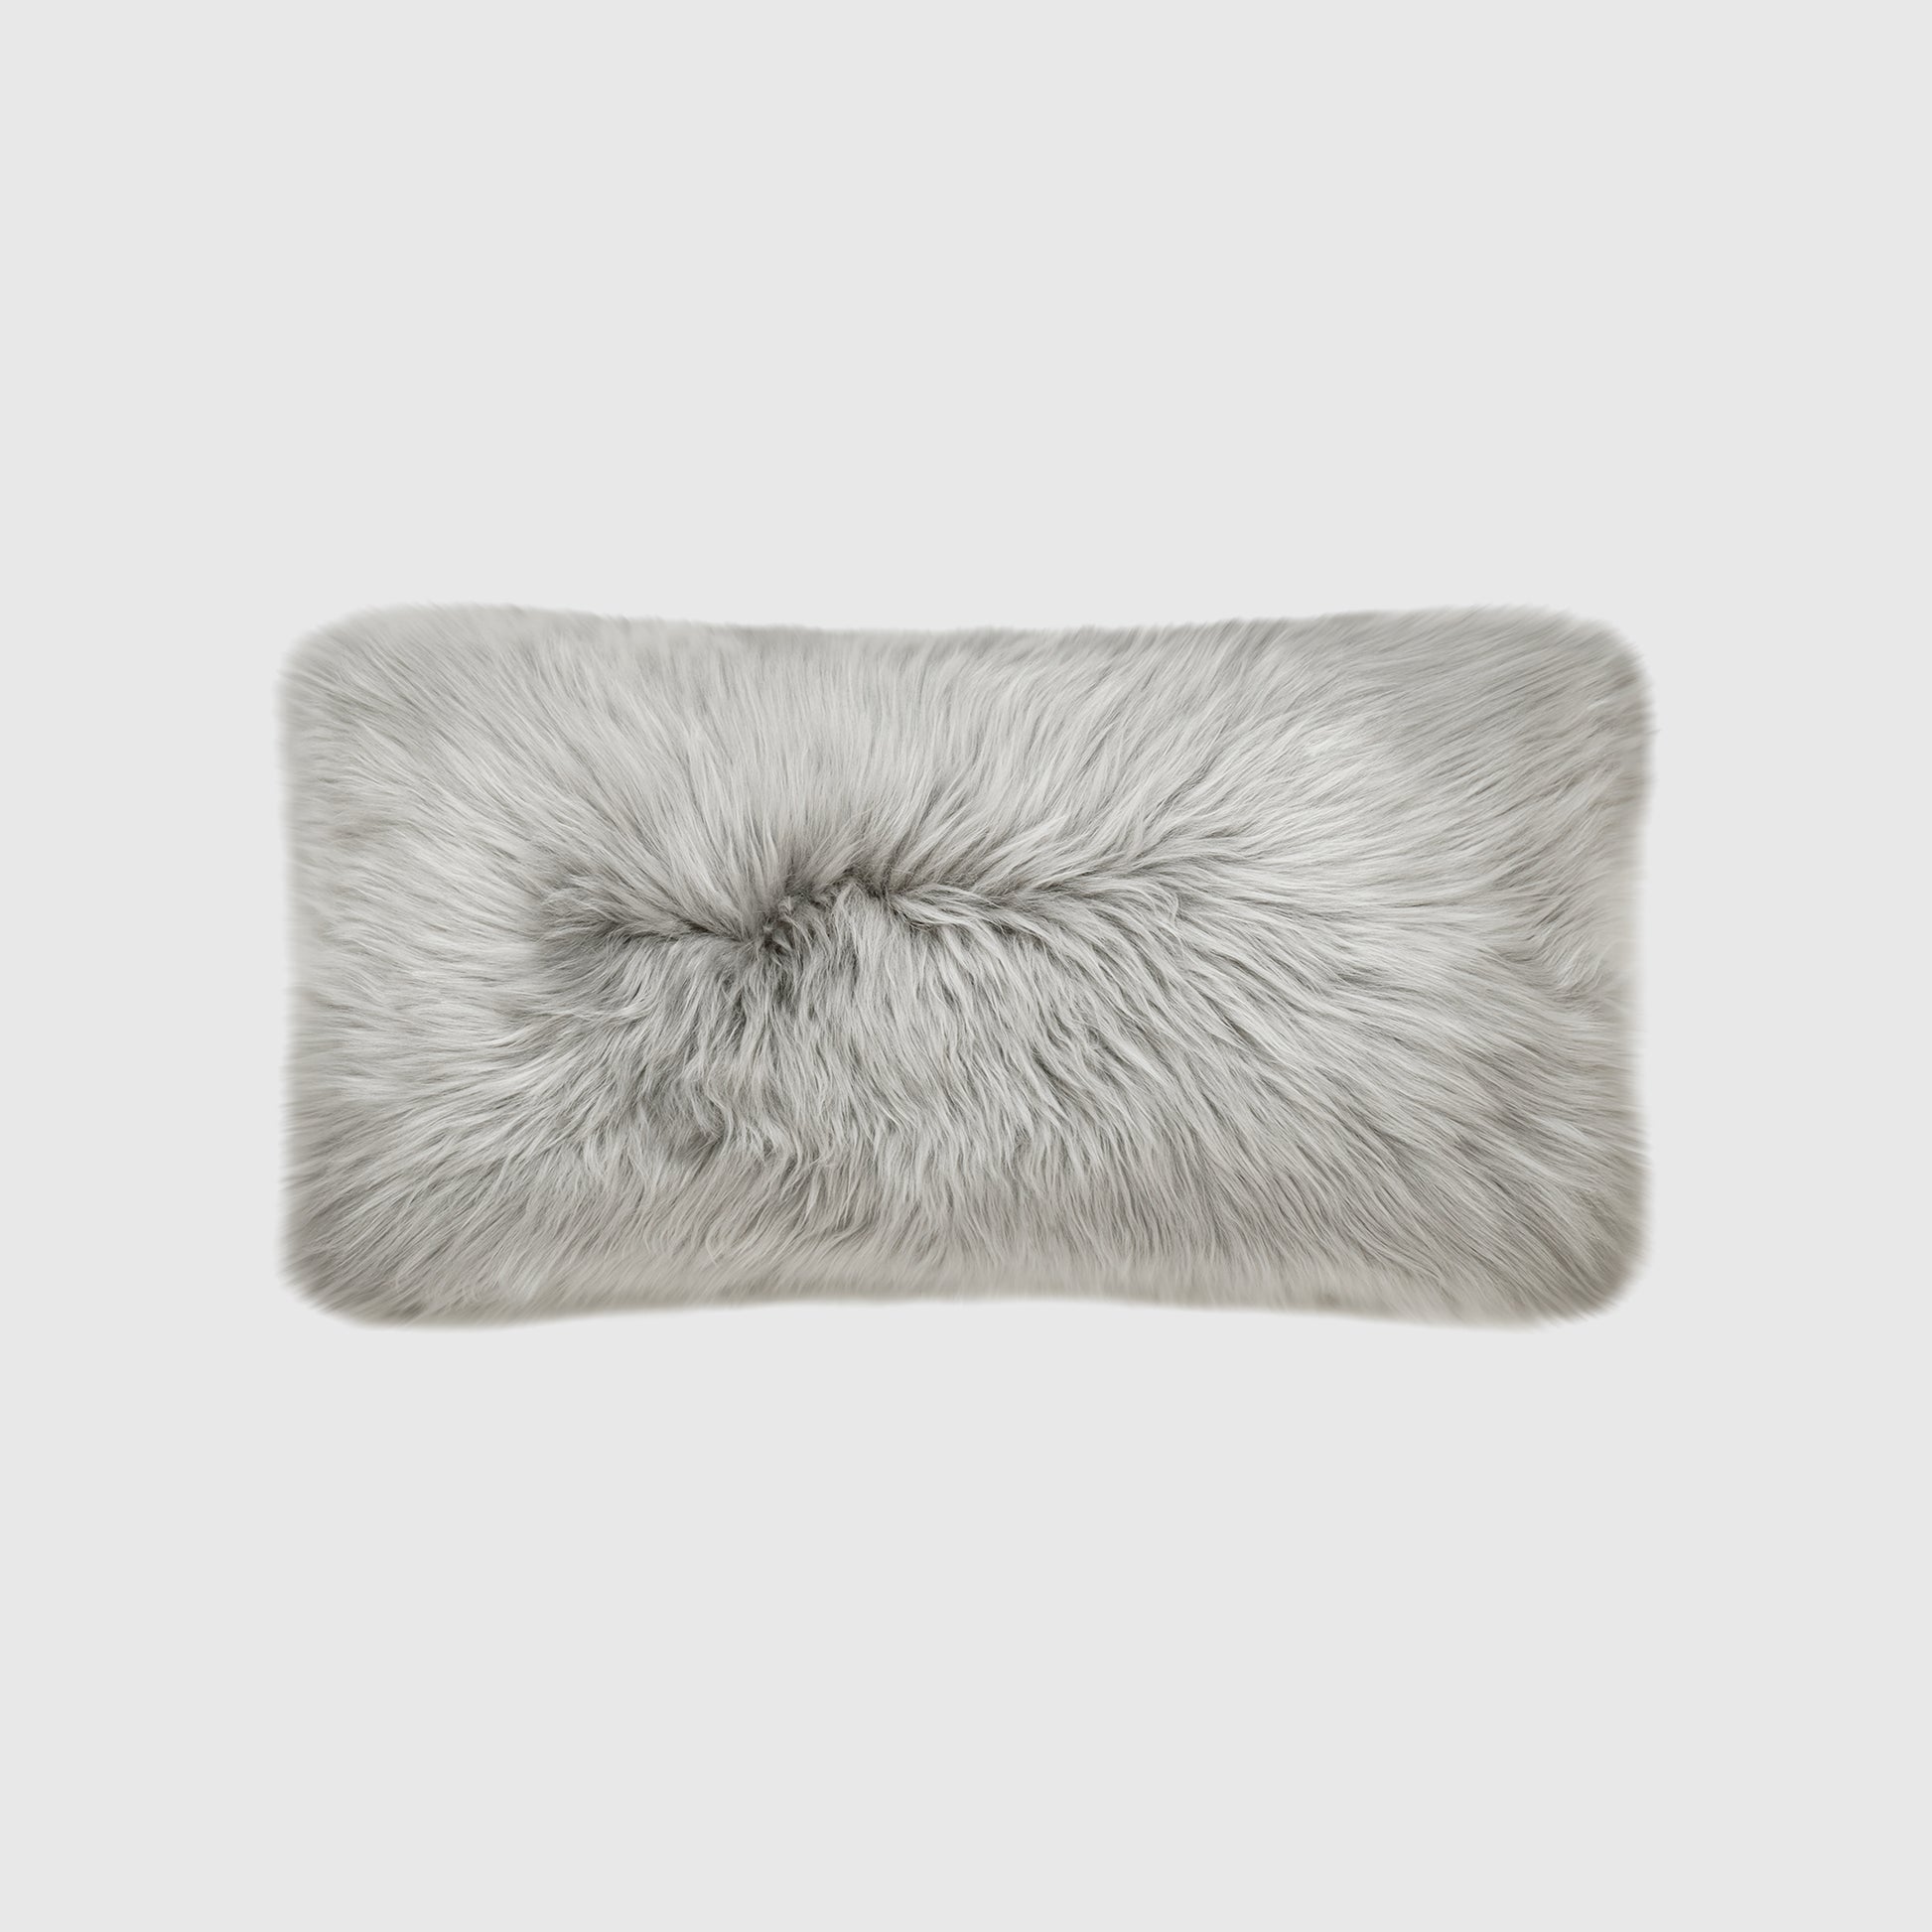 The Mood | Charlie Sheepskin Double-sided 12"x22" Pillow, Dove Gray